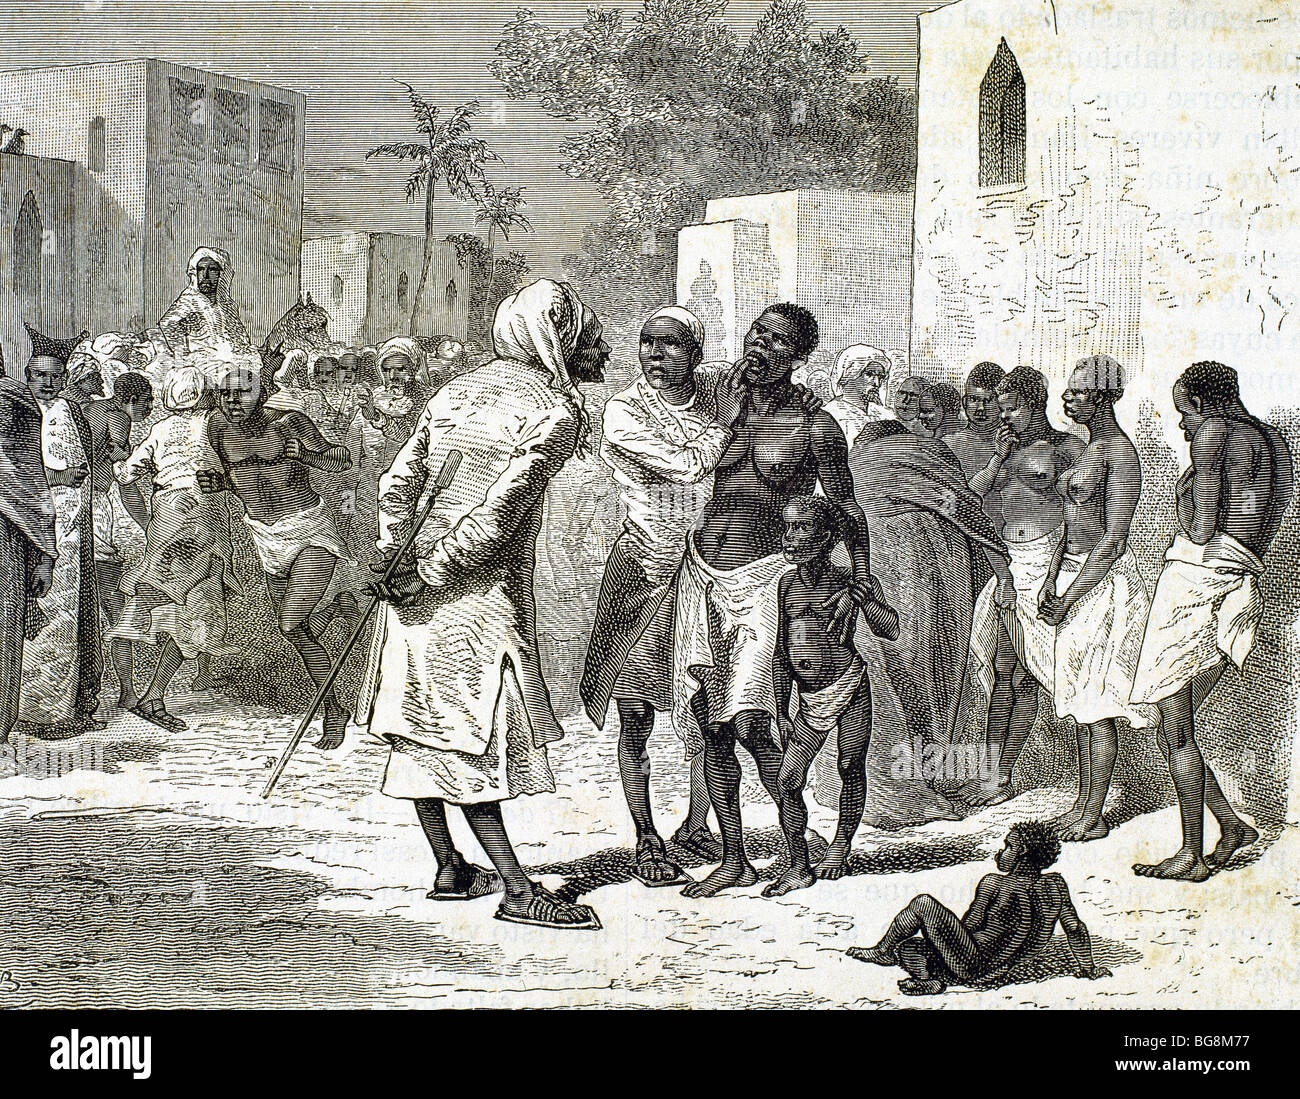 Slave Market High Resolution Stock Photography and Images - Alamy